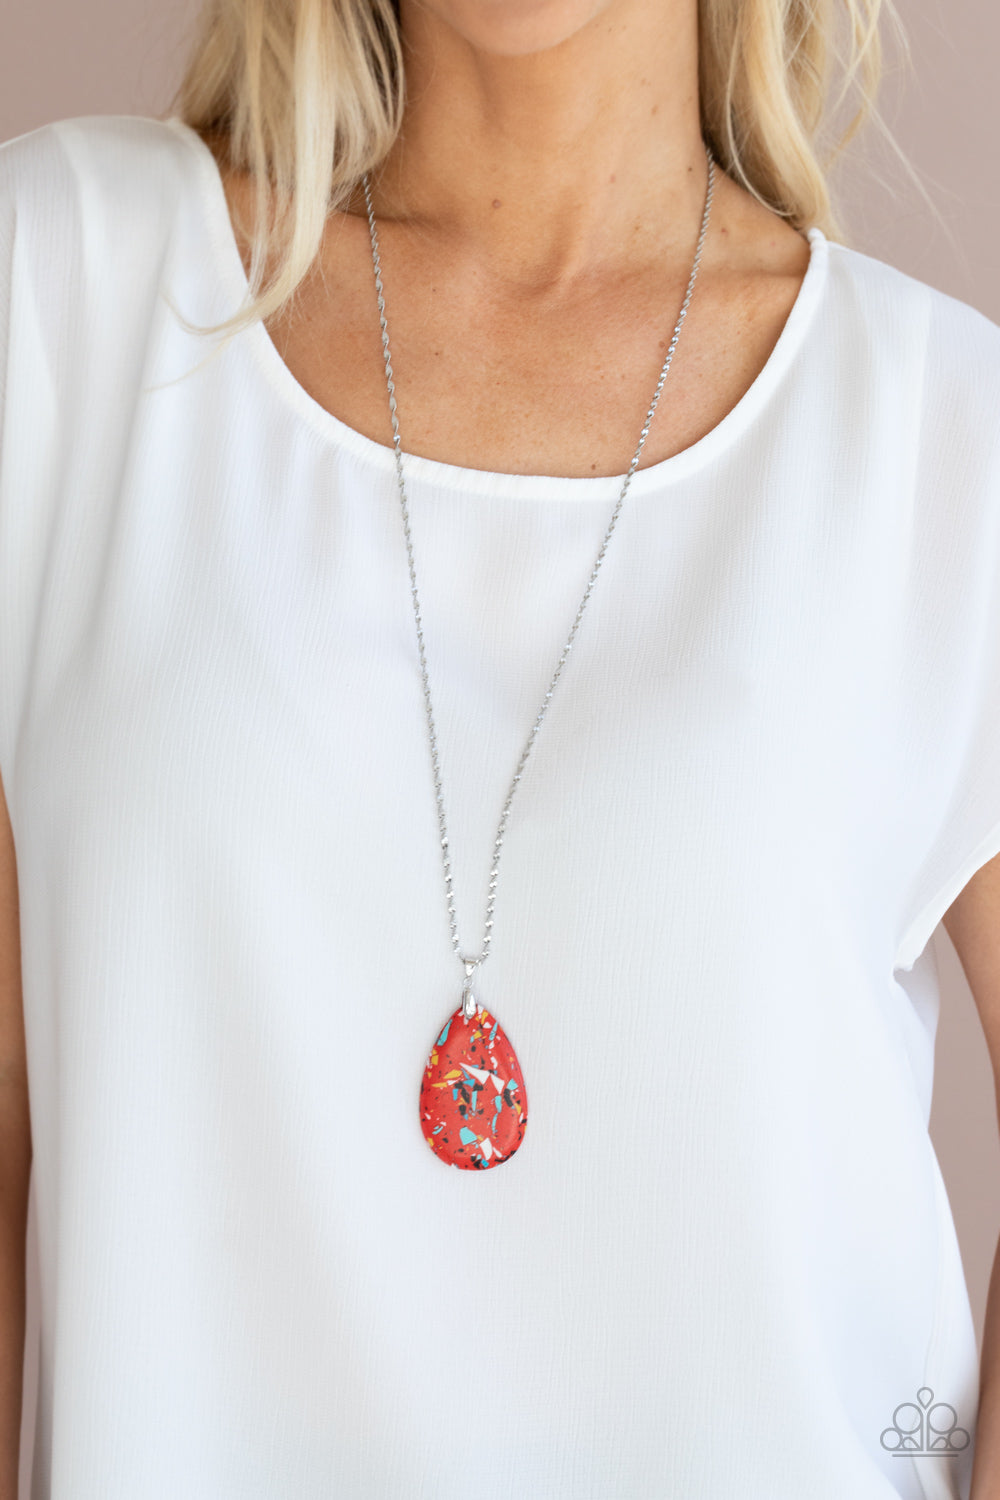 Extra Elemental Necklace - Red